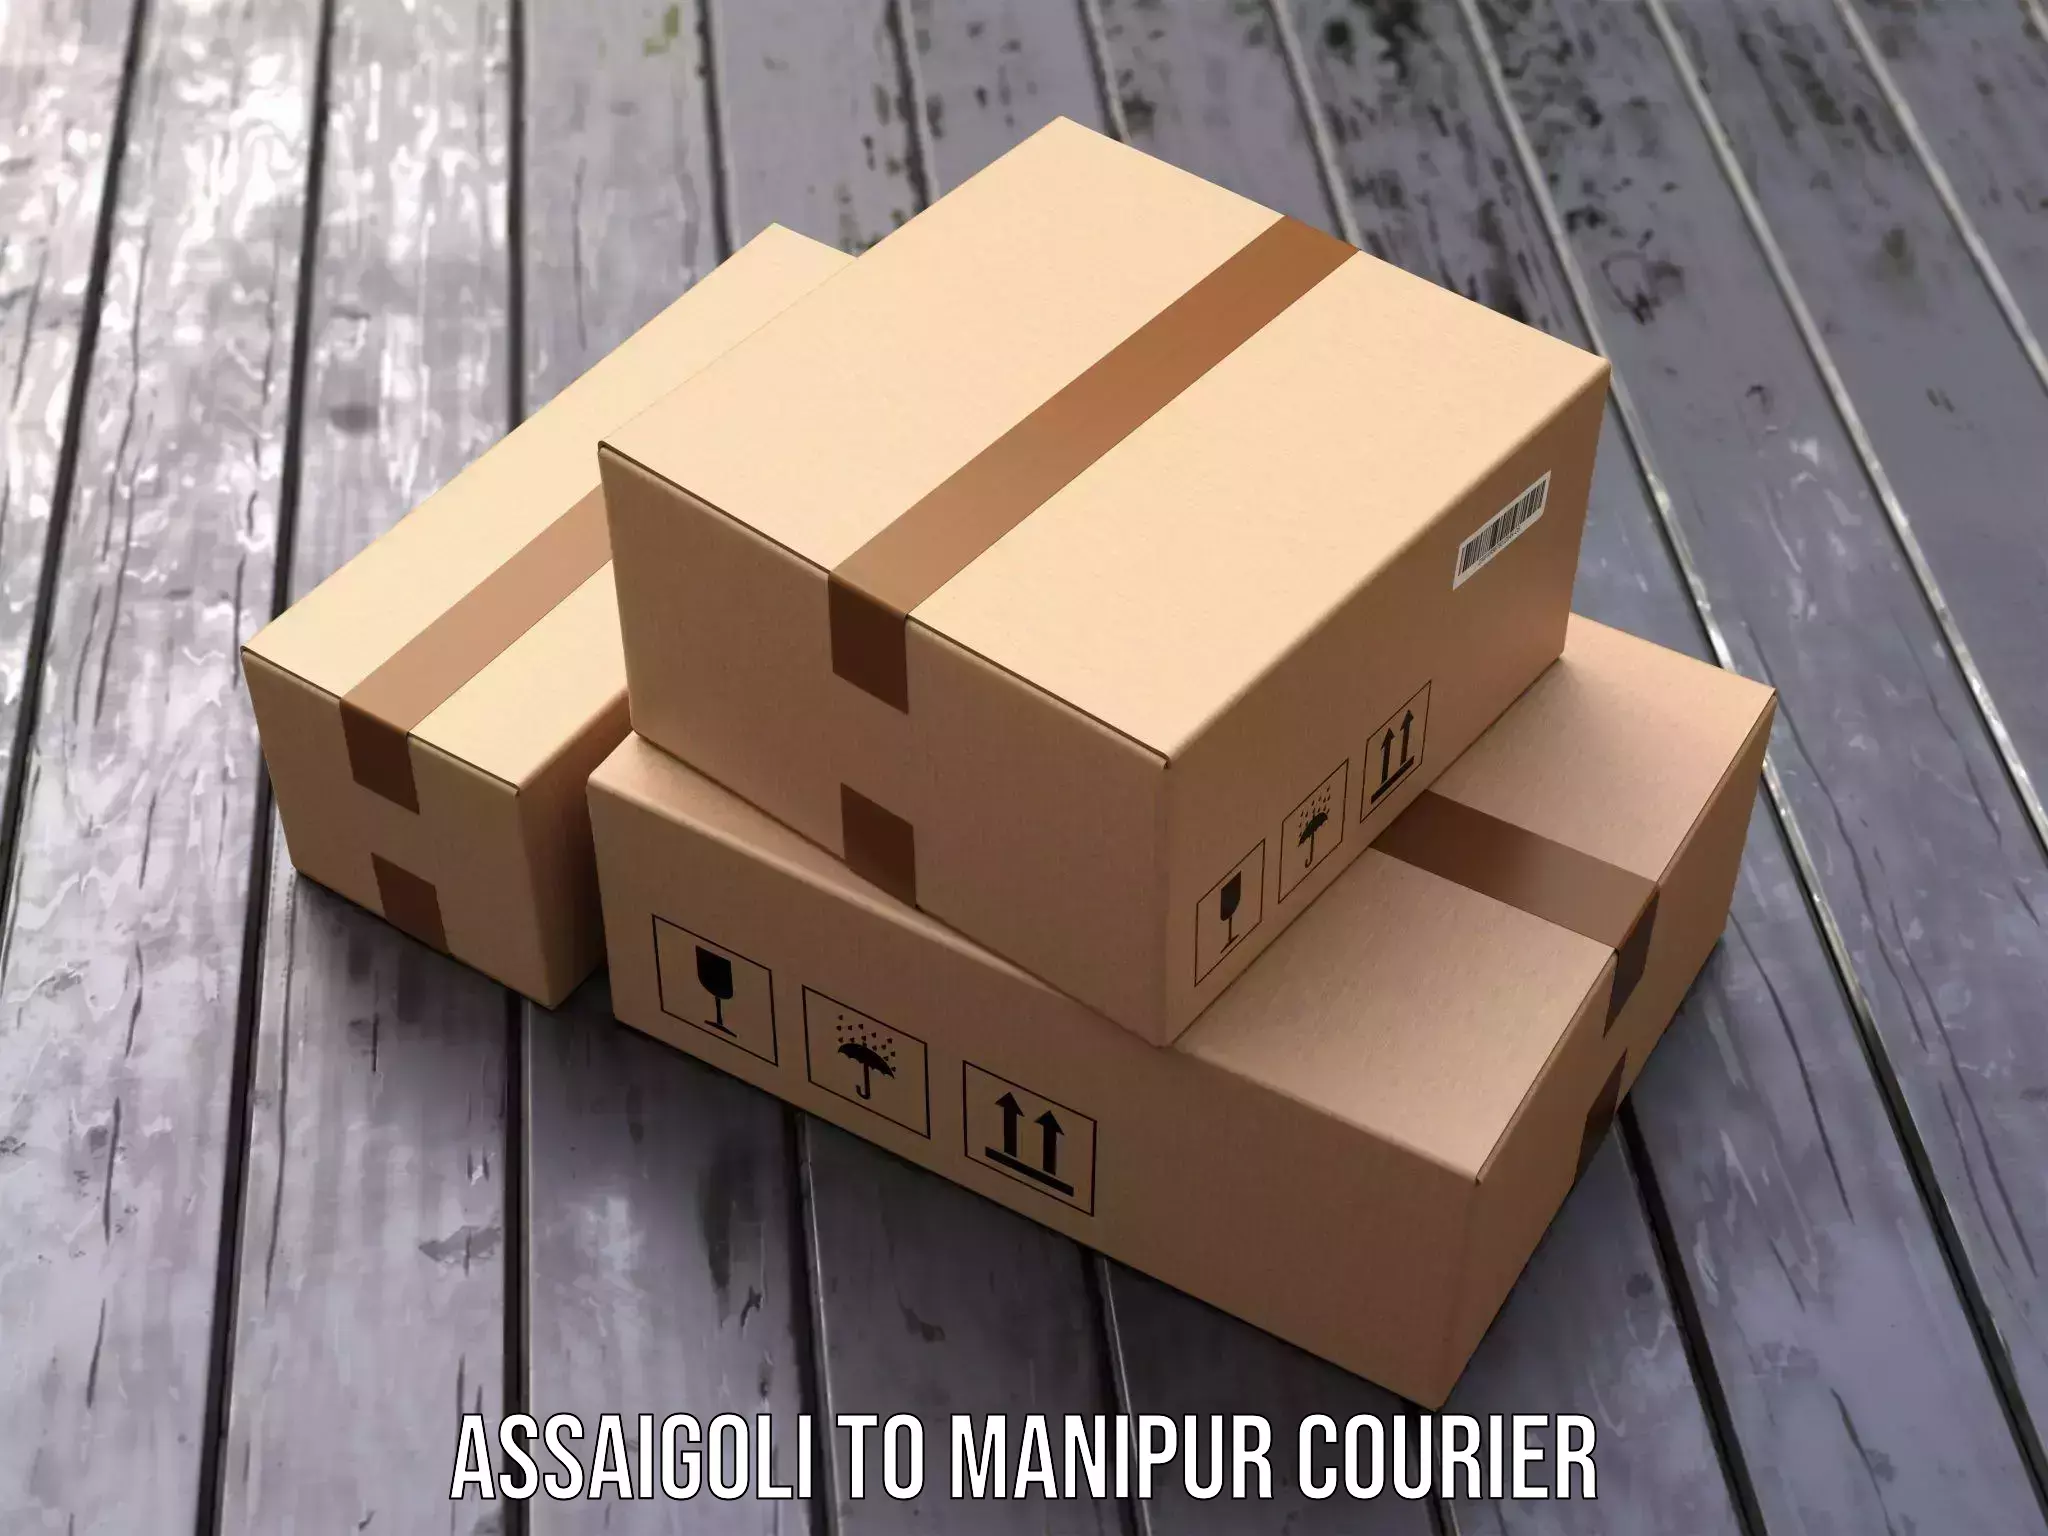 Cash on delivery service Assaigoli to Manipur